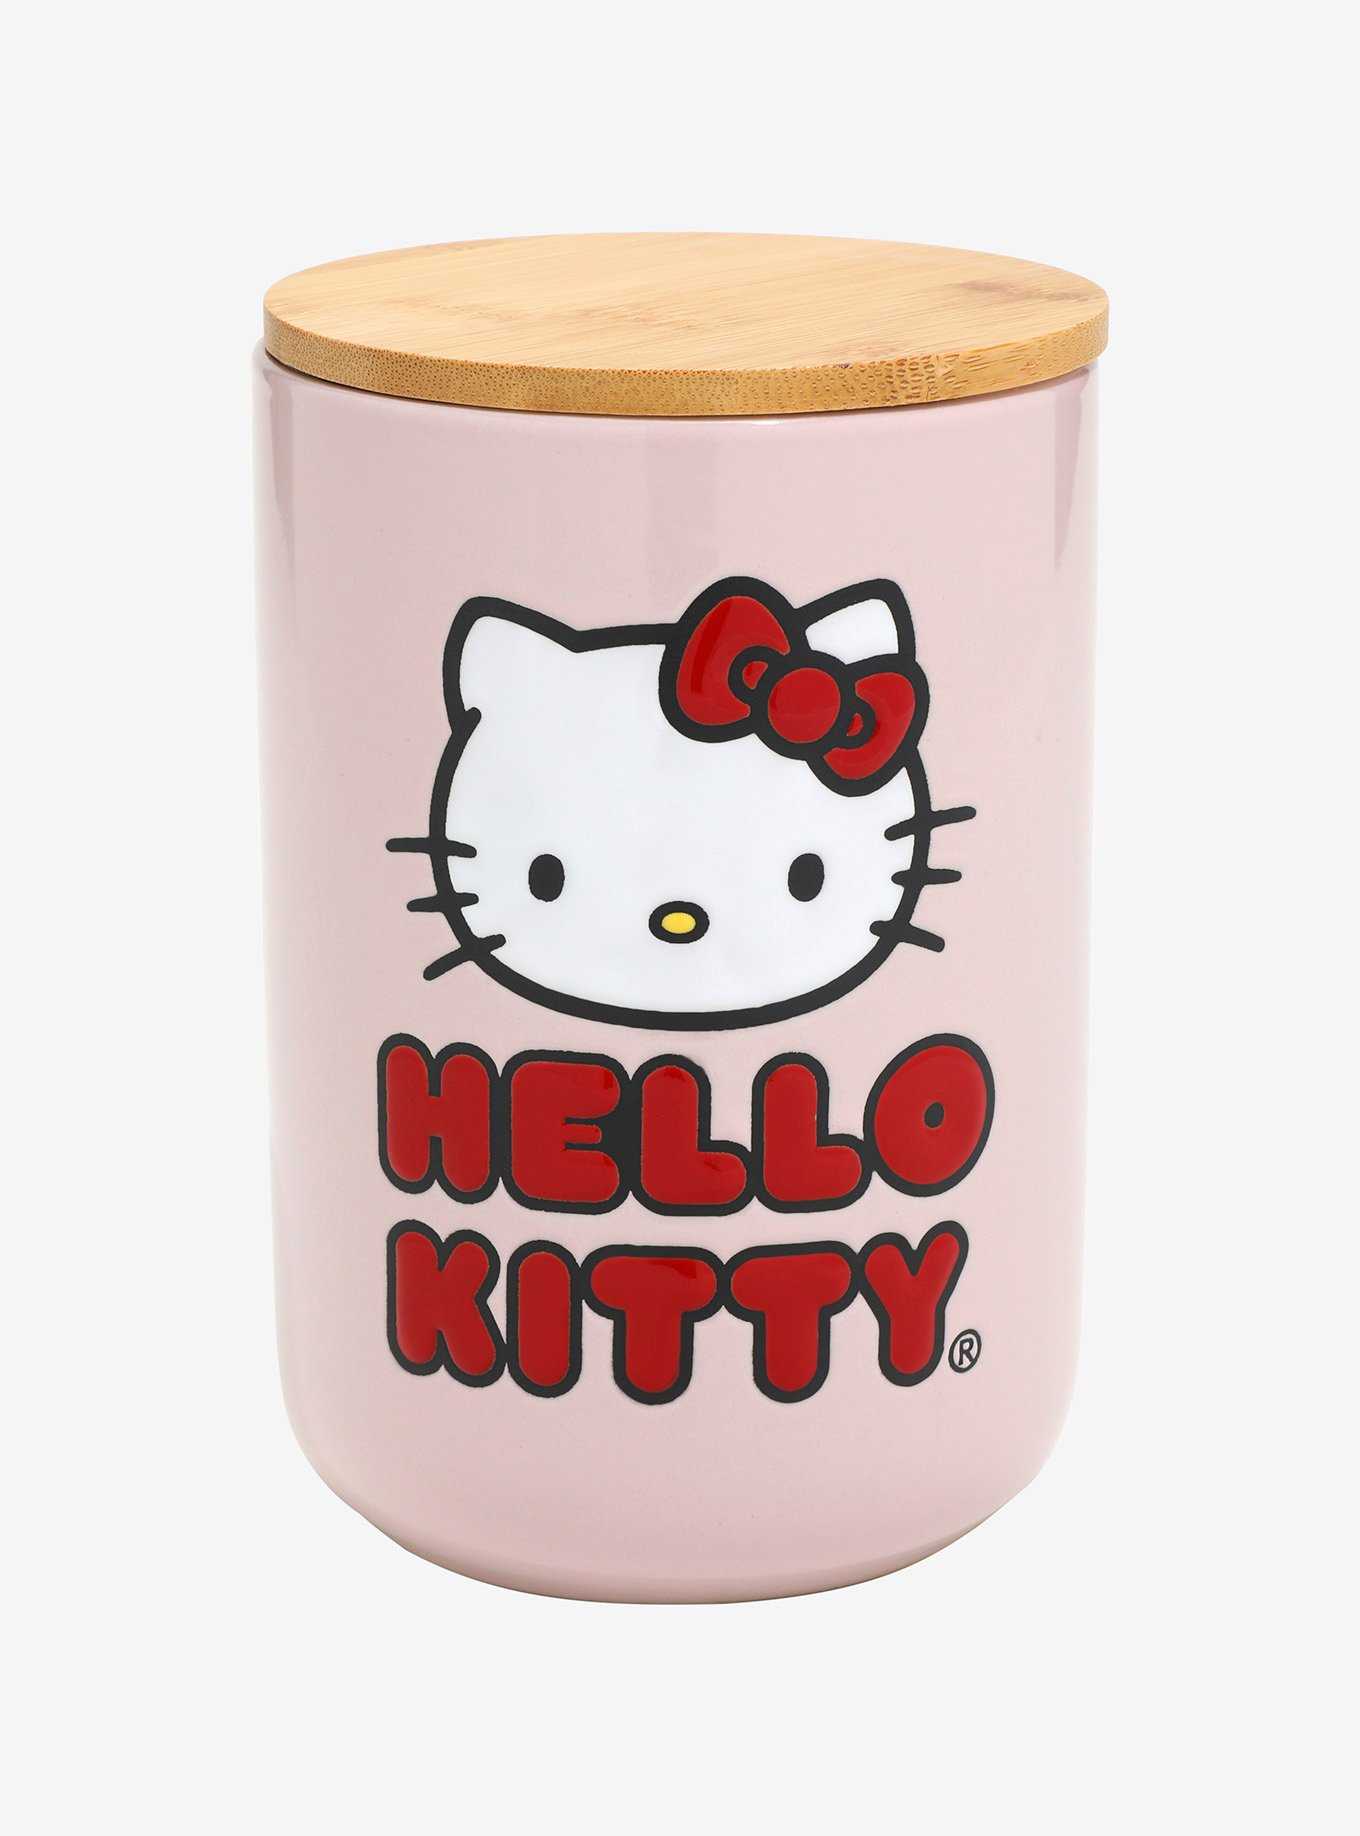 Does any1 know the price of the Christmas Tupperware? : r/HelloKitty